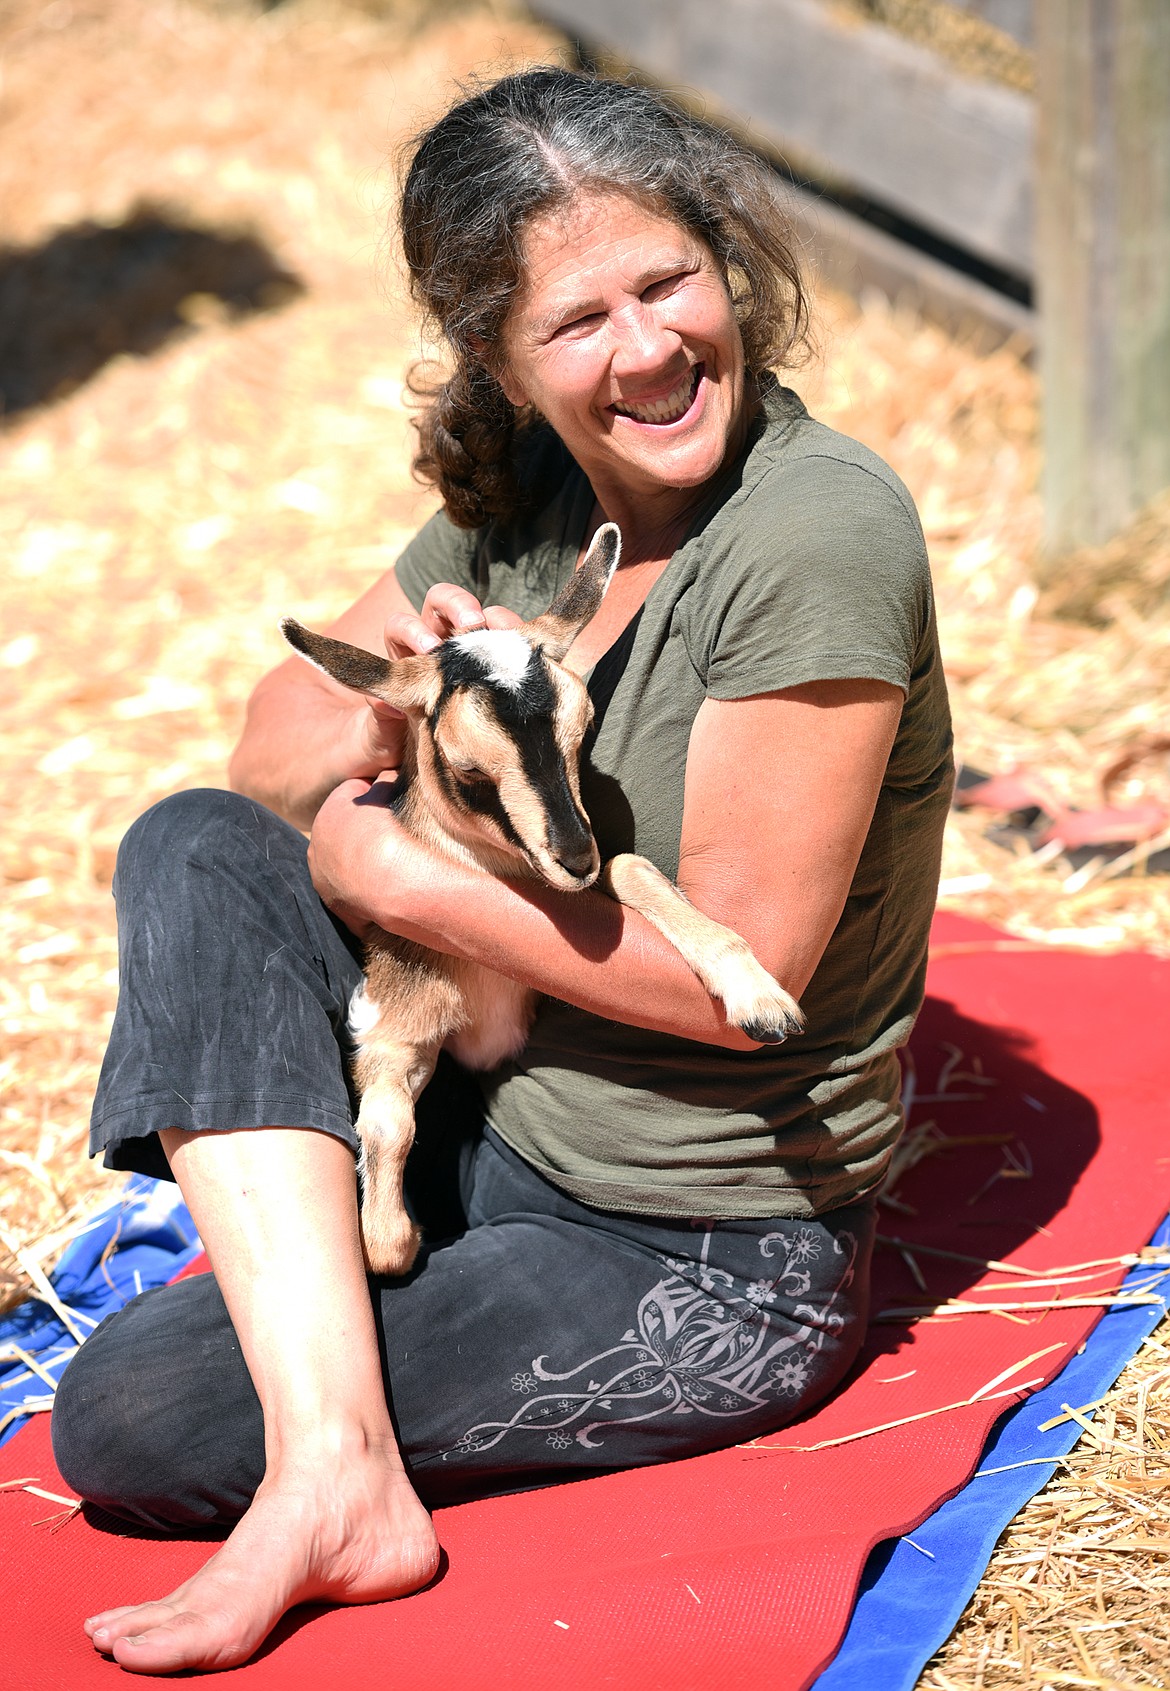 Wendy Anderson of Bigfork smiles as she holds a baby goat during Goat Yoga on Sunday, June 25, at Flying Pig Farms north of Kalispell.(Brenda Ahearn/Daily Inter Lake)